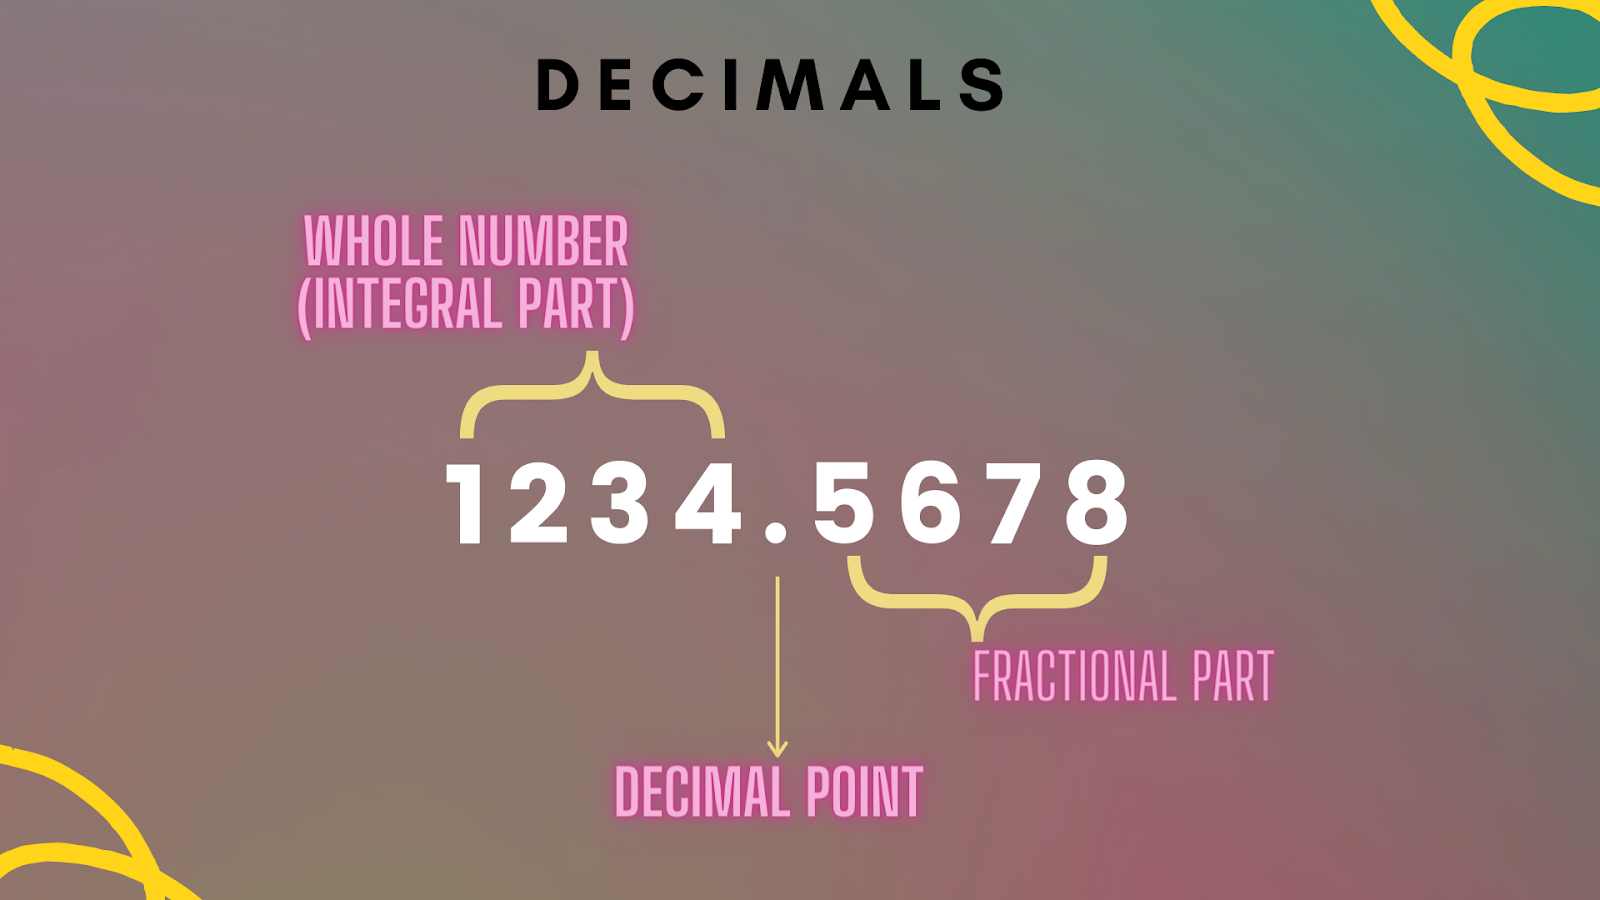 illustrates the parts of a Decimal number